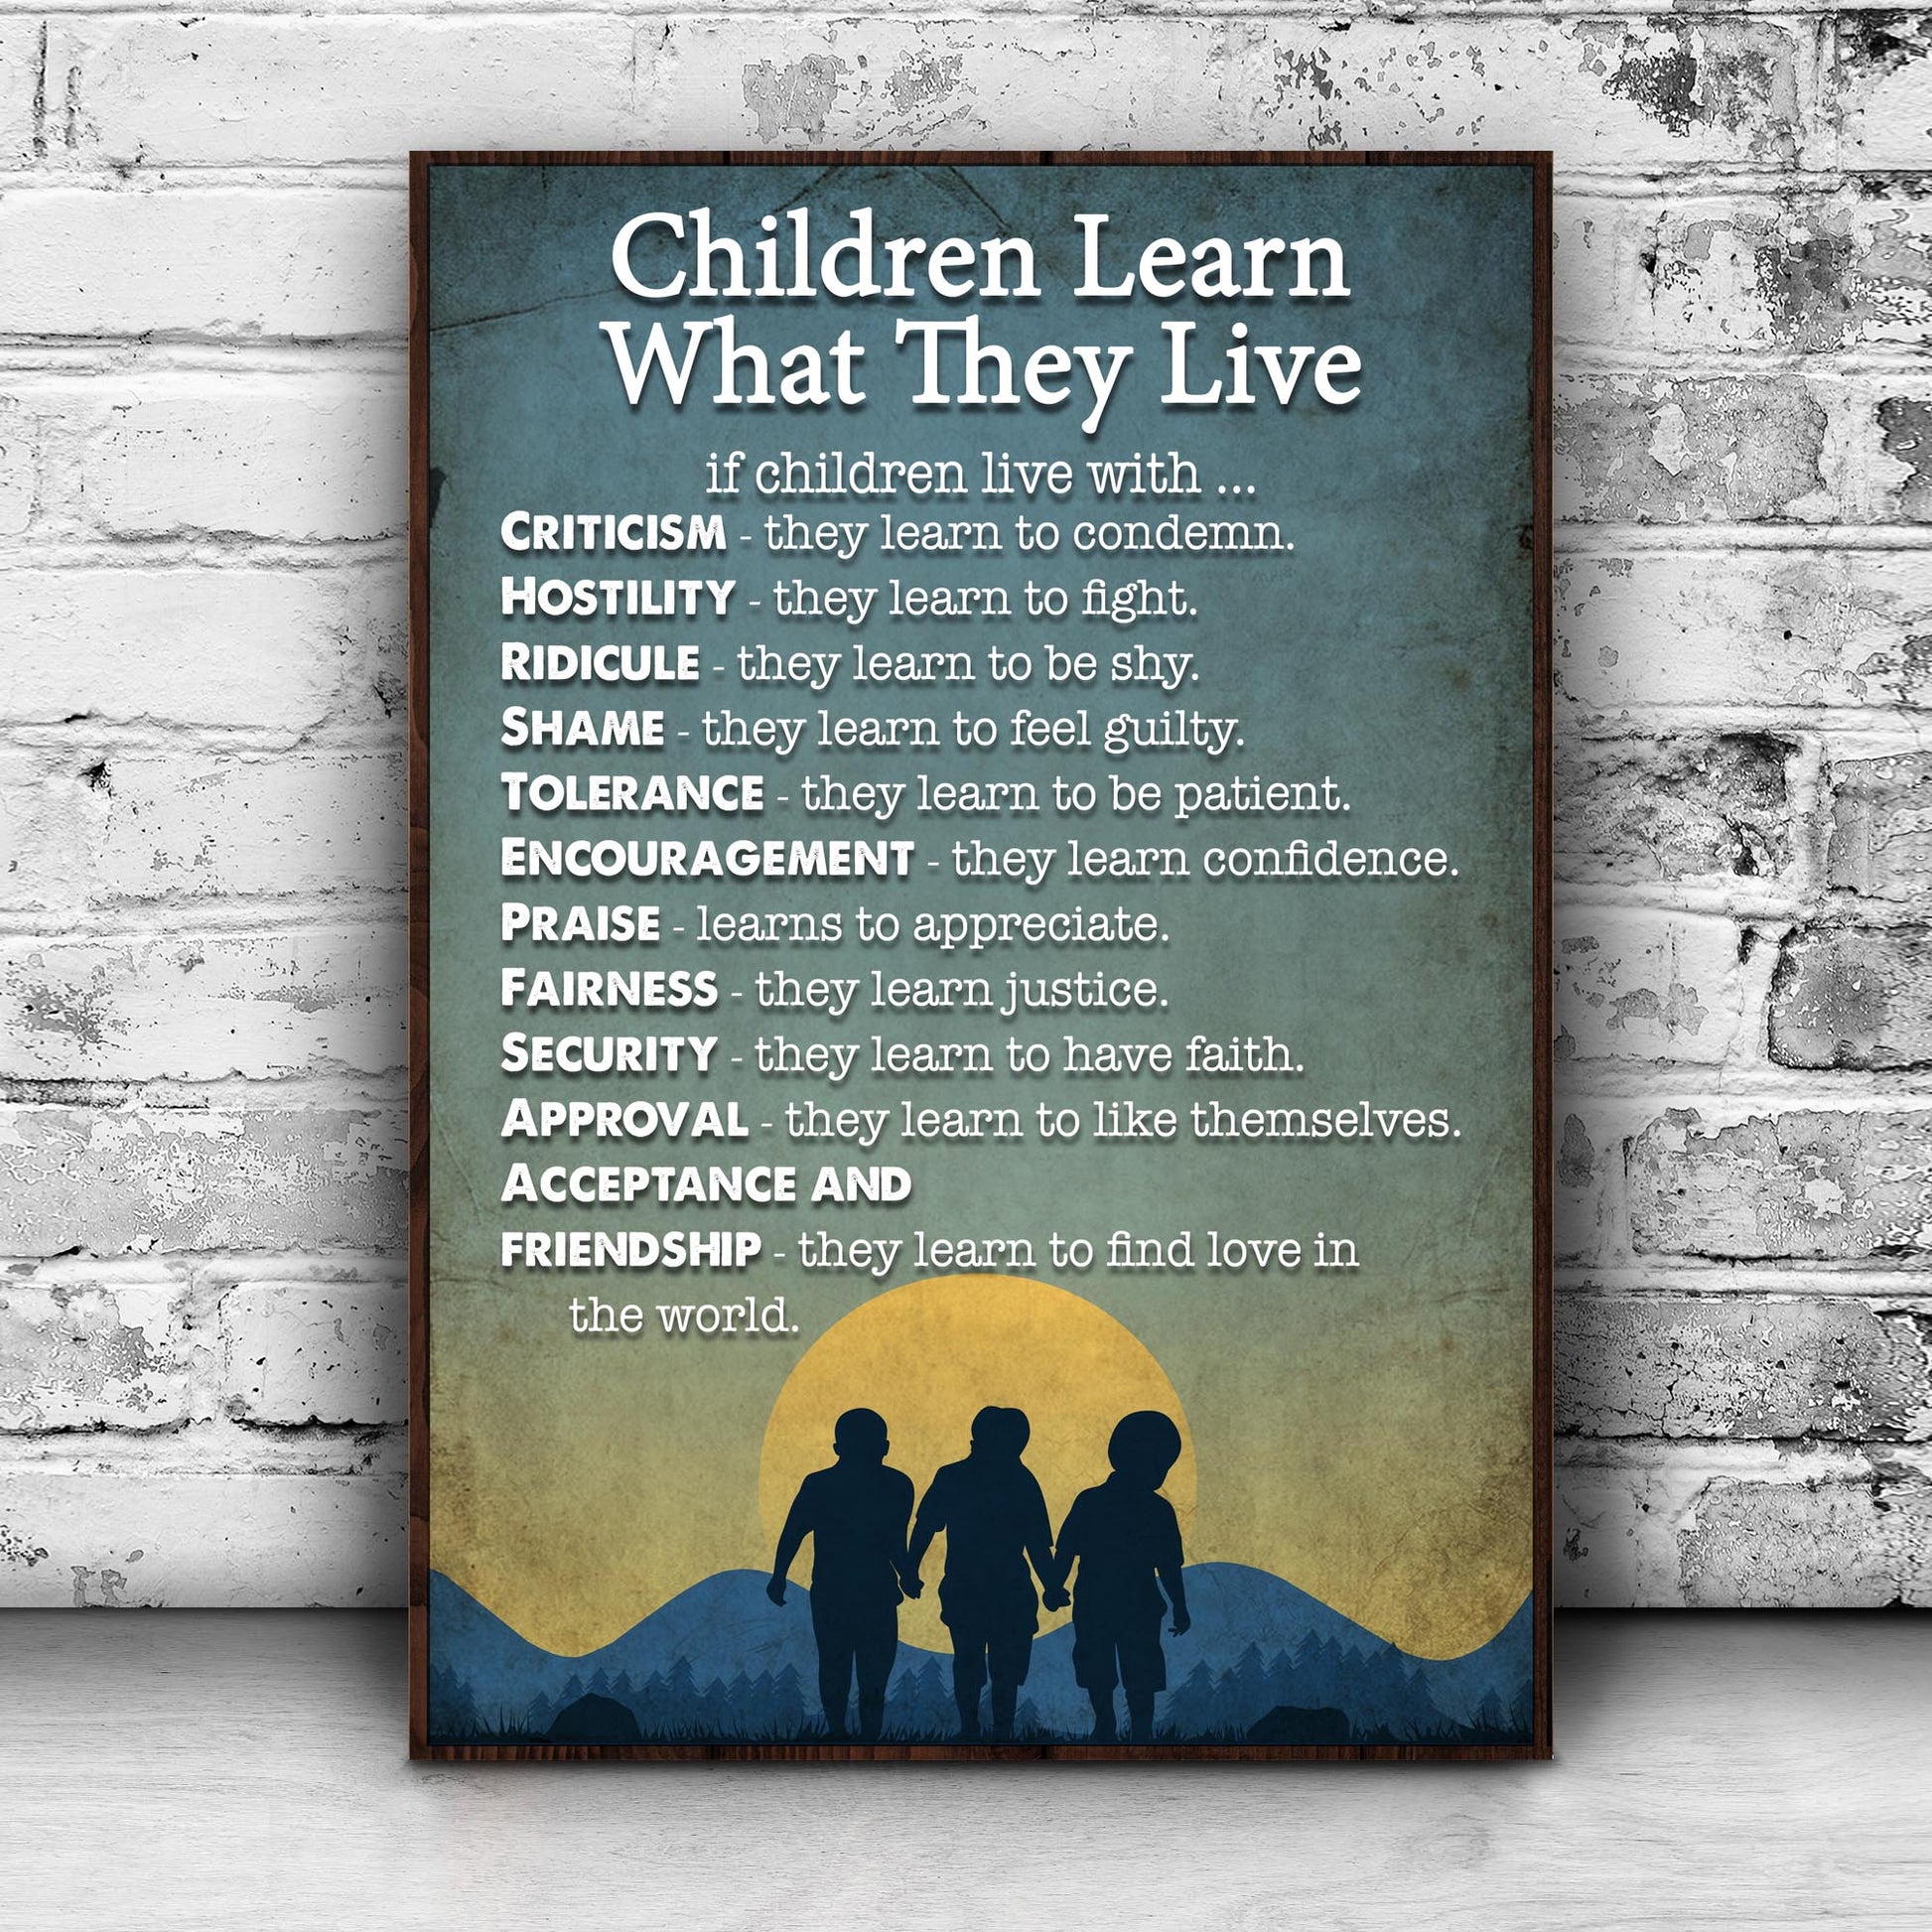 Children Learn What They Live Kids Sign - Image by Tailored Canvases